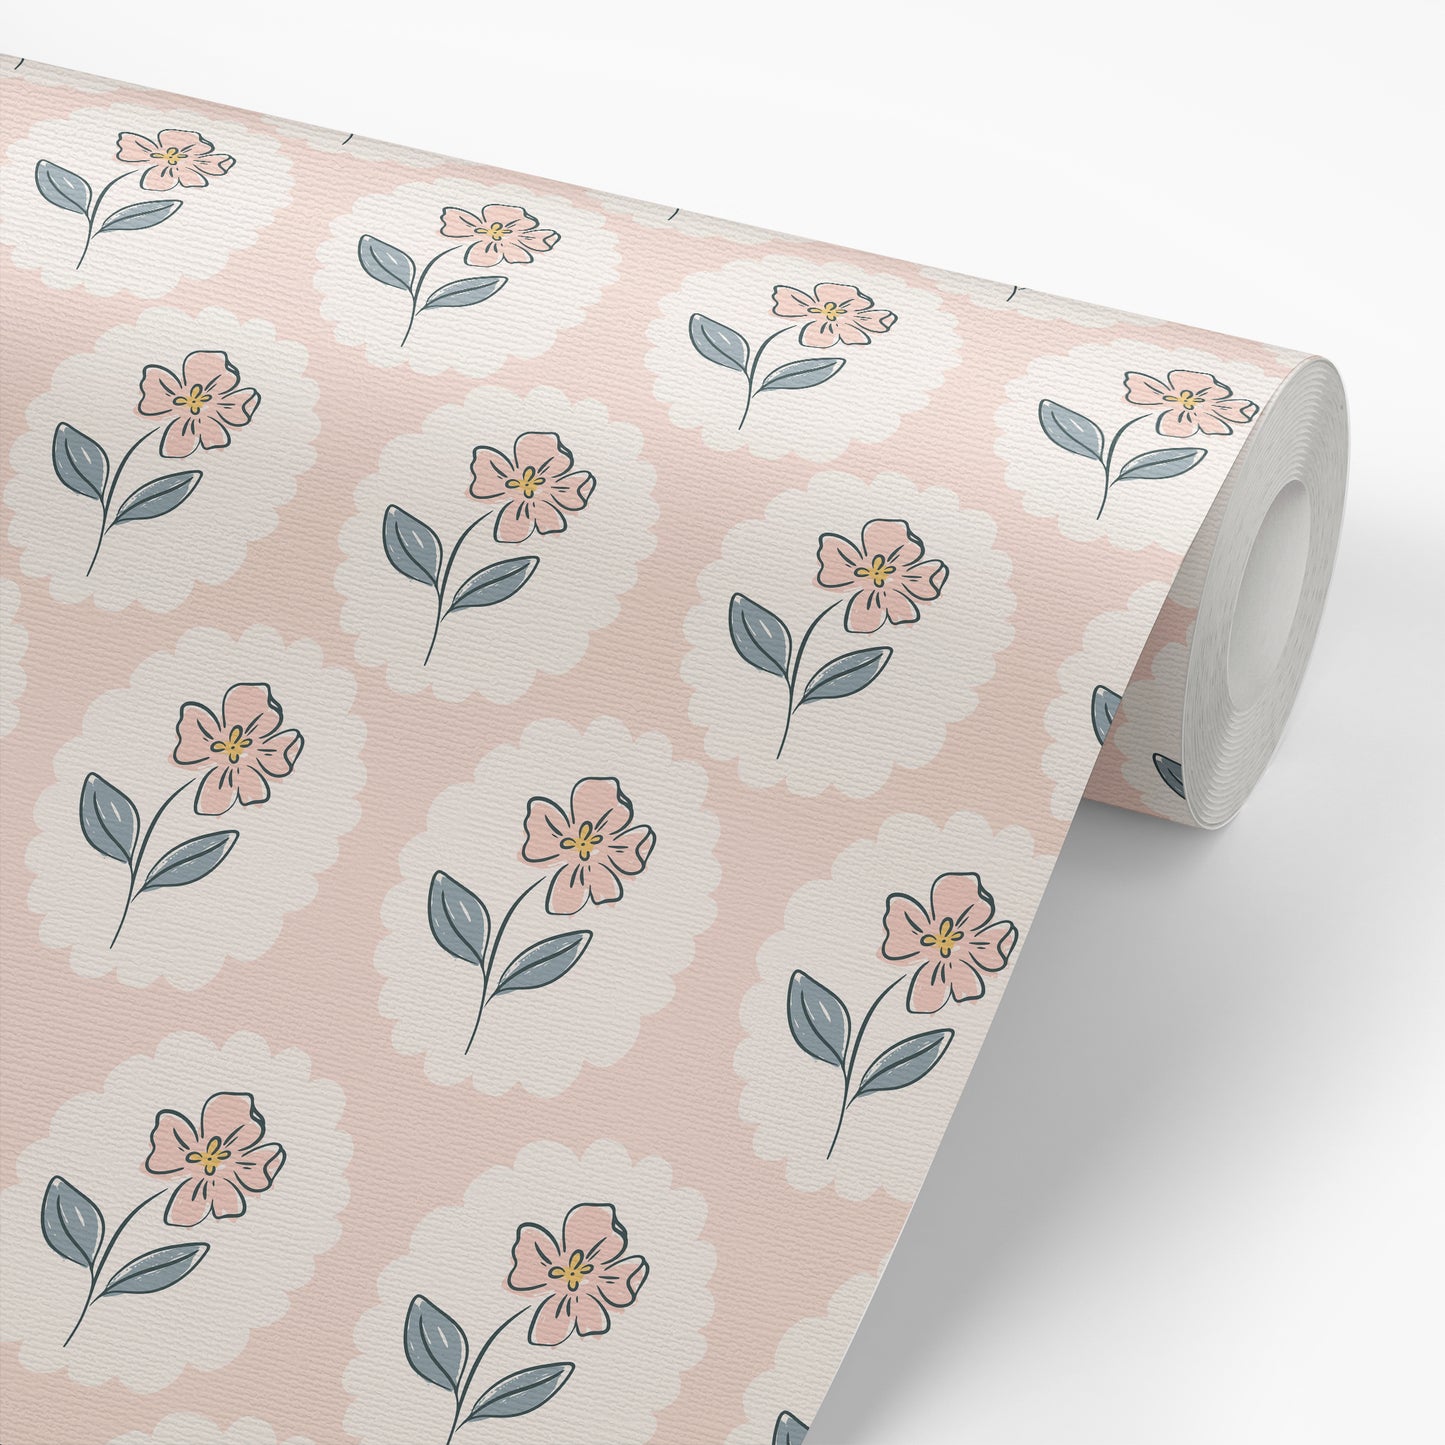 Wallpaper Roll featuring Dancing Petals Peel and Stick, Removable Wallpaper in Blush